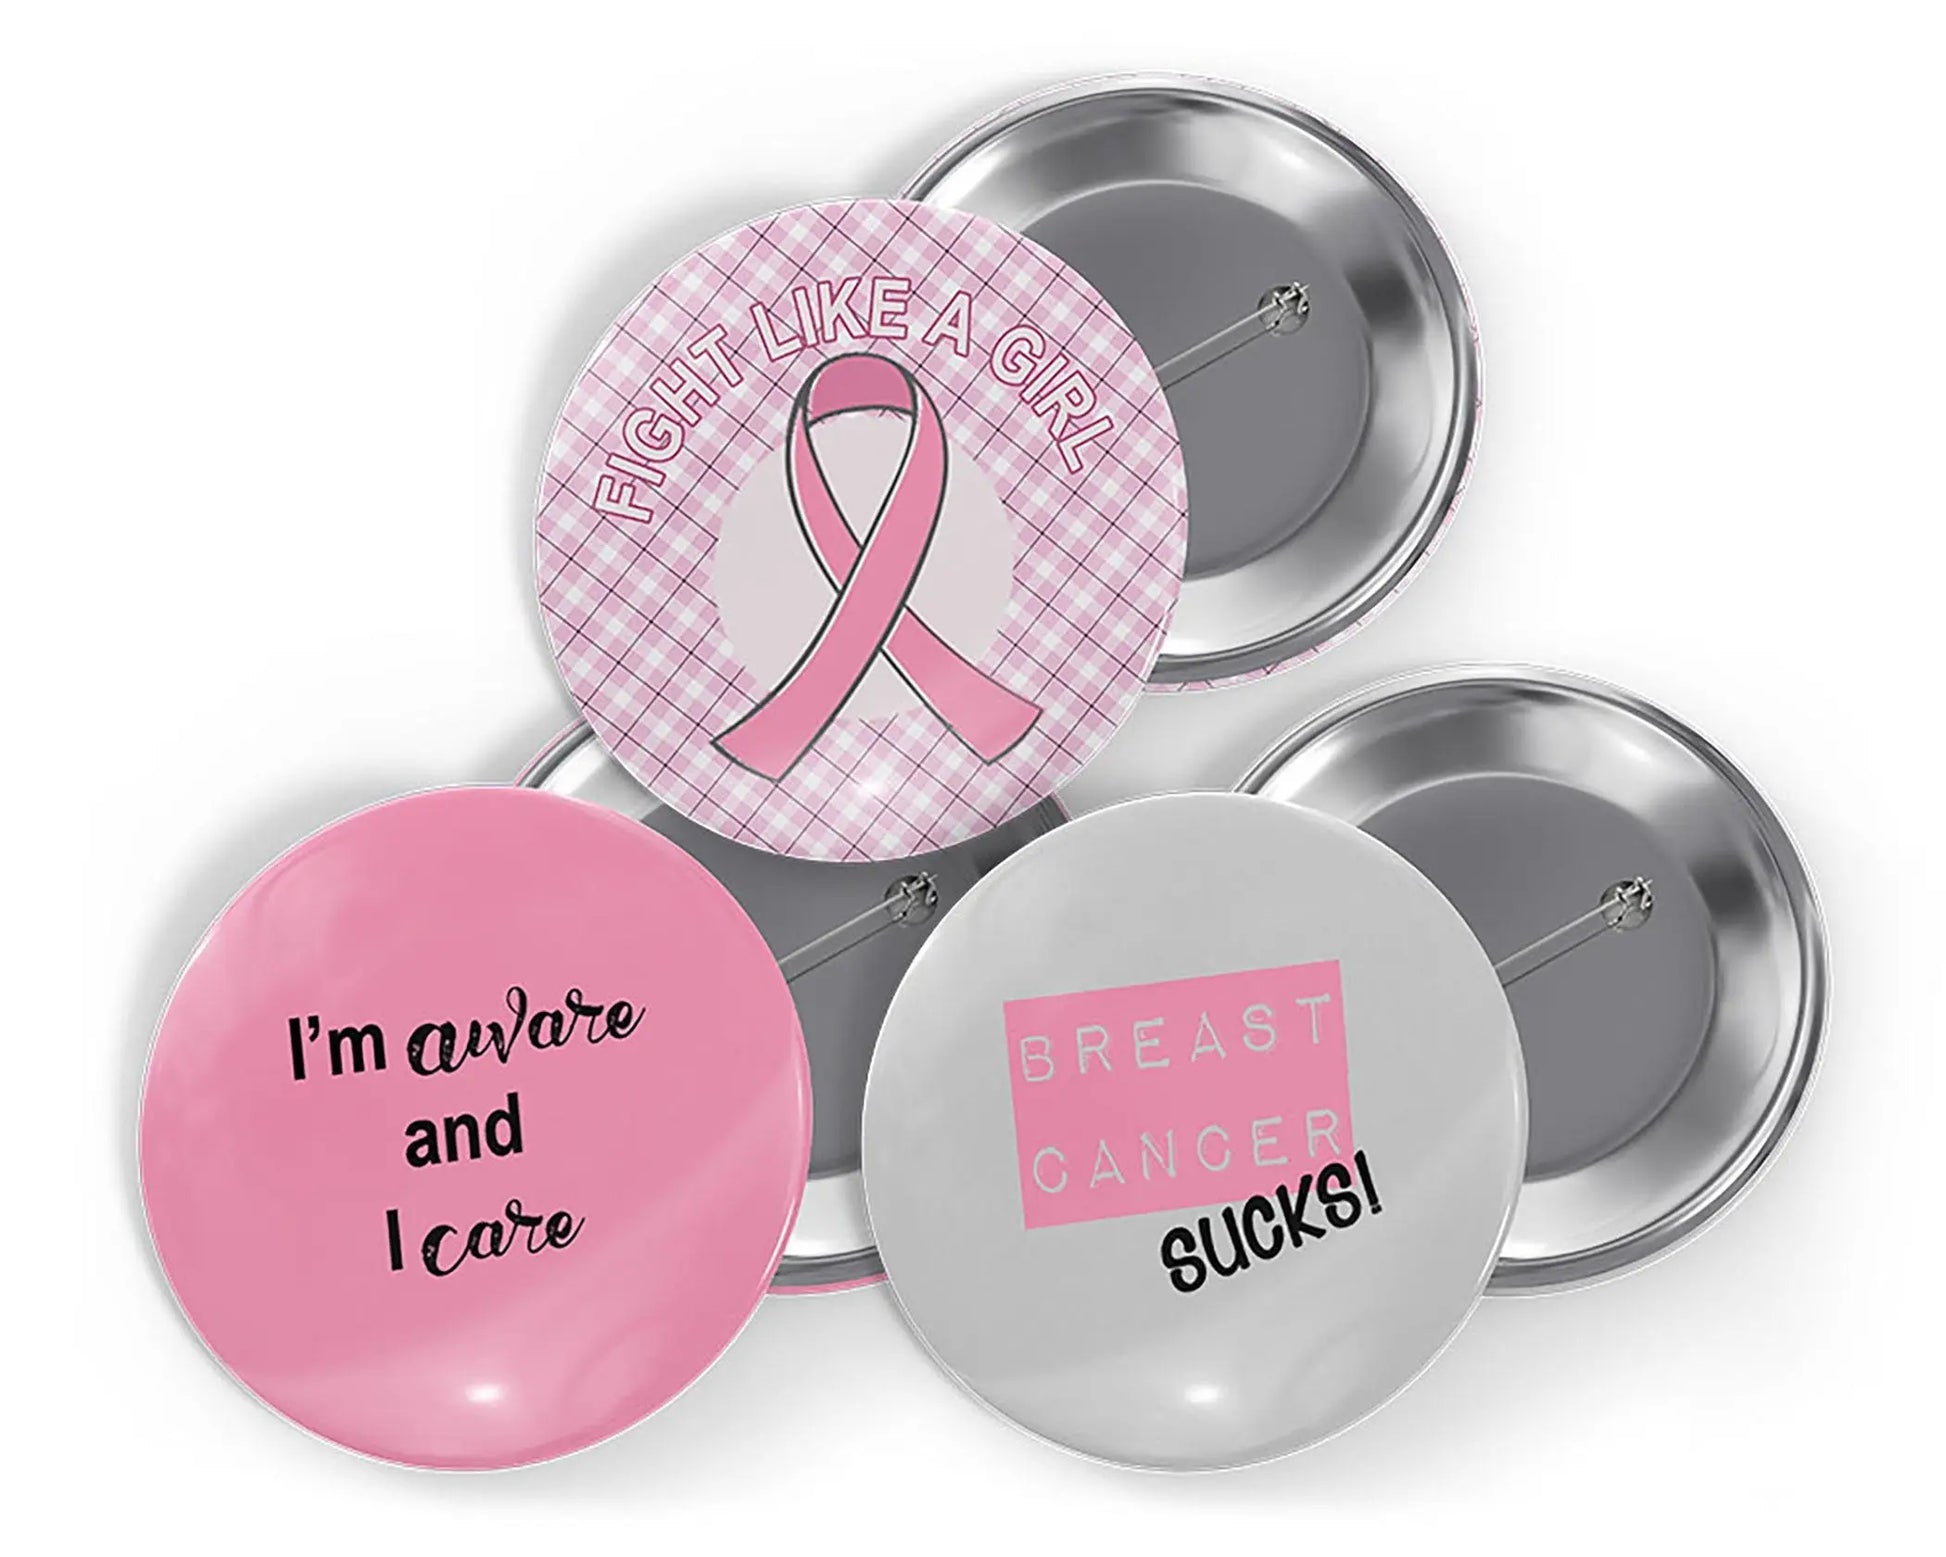 Breast Cancer Awareness, Pink Ribbon Button Pins - Trio Pack